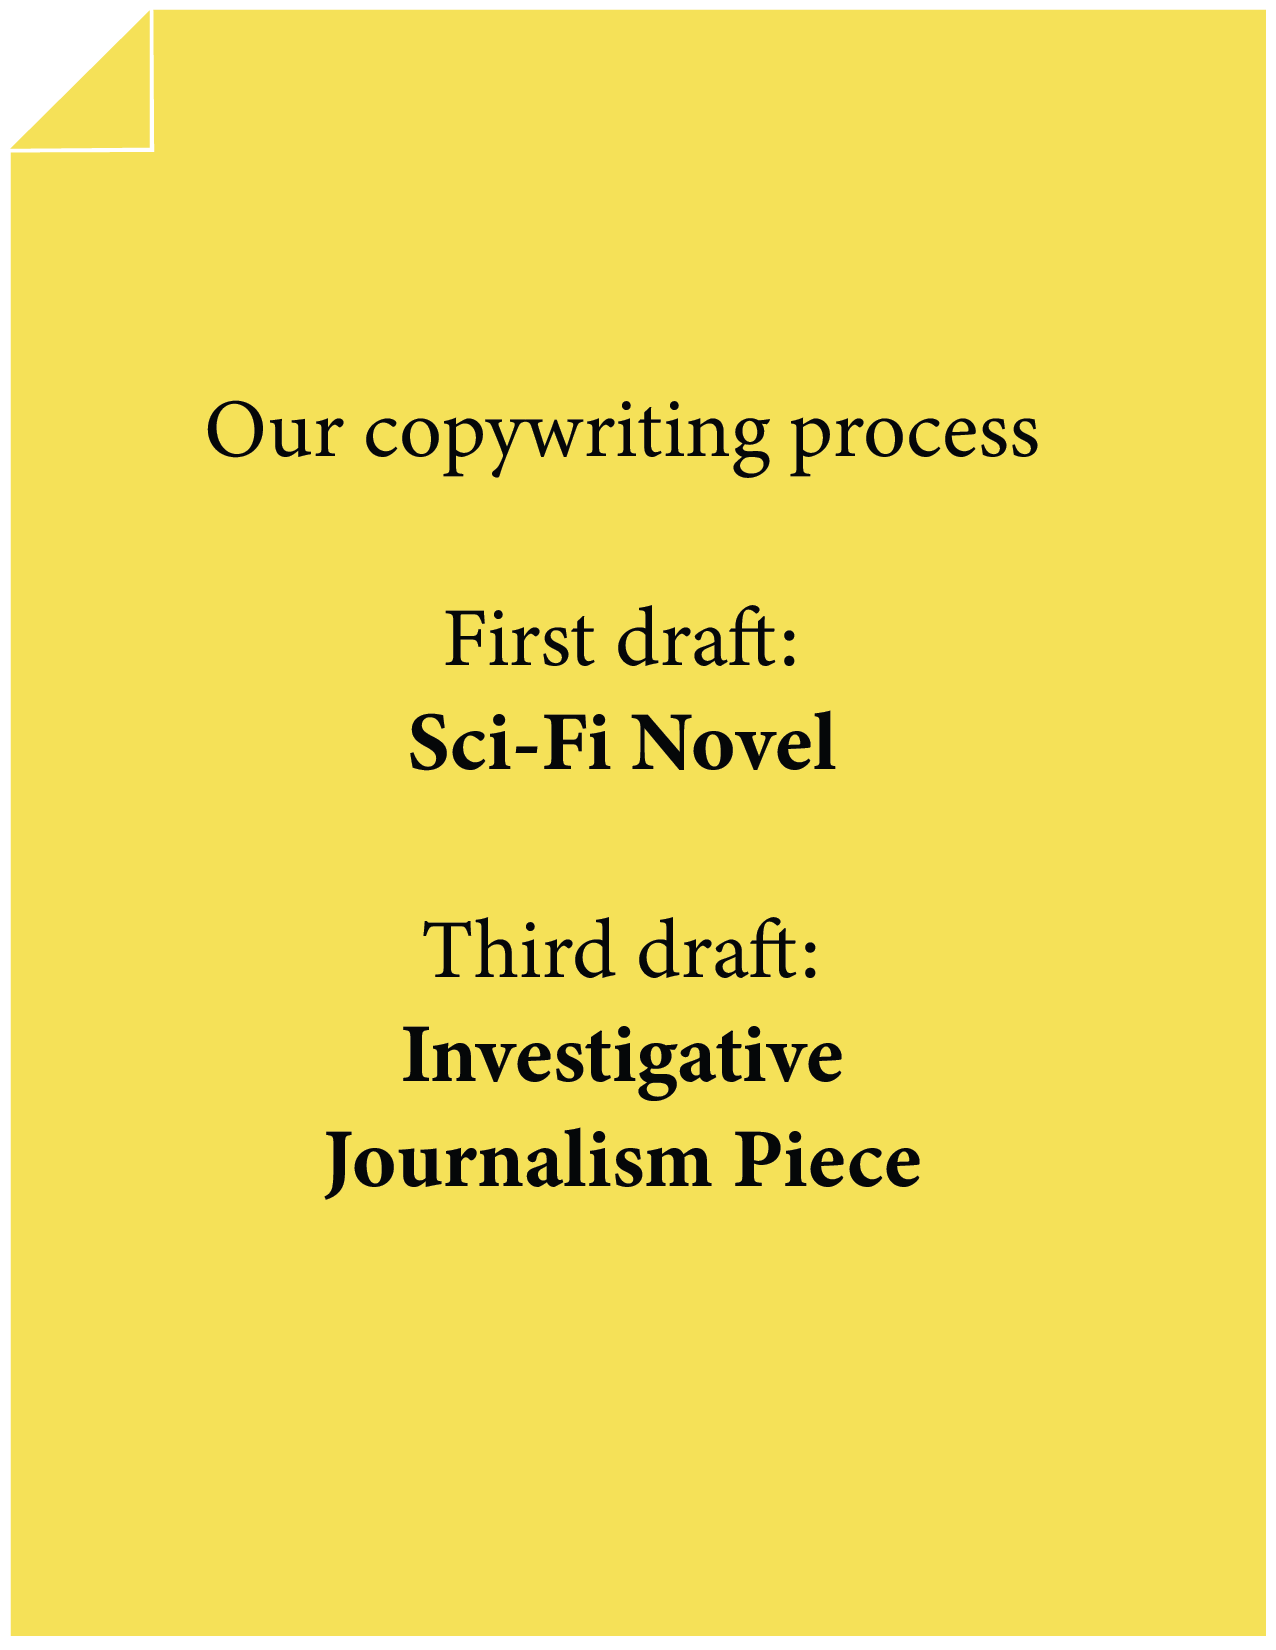 The difference between the first and final drafts.